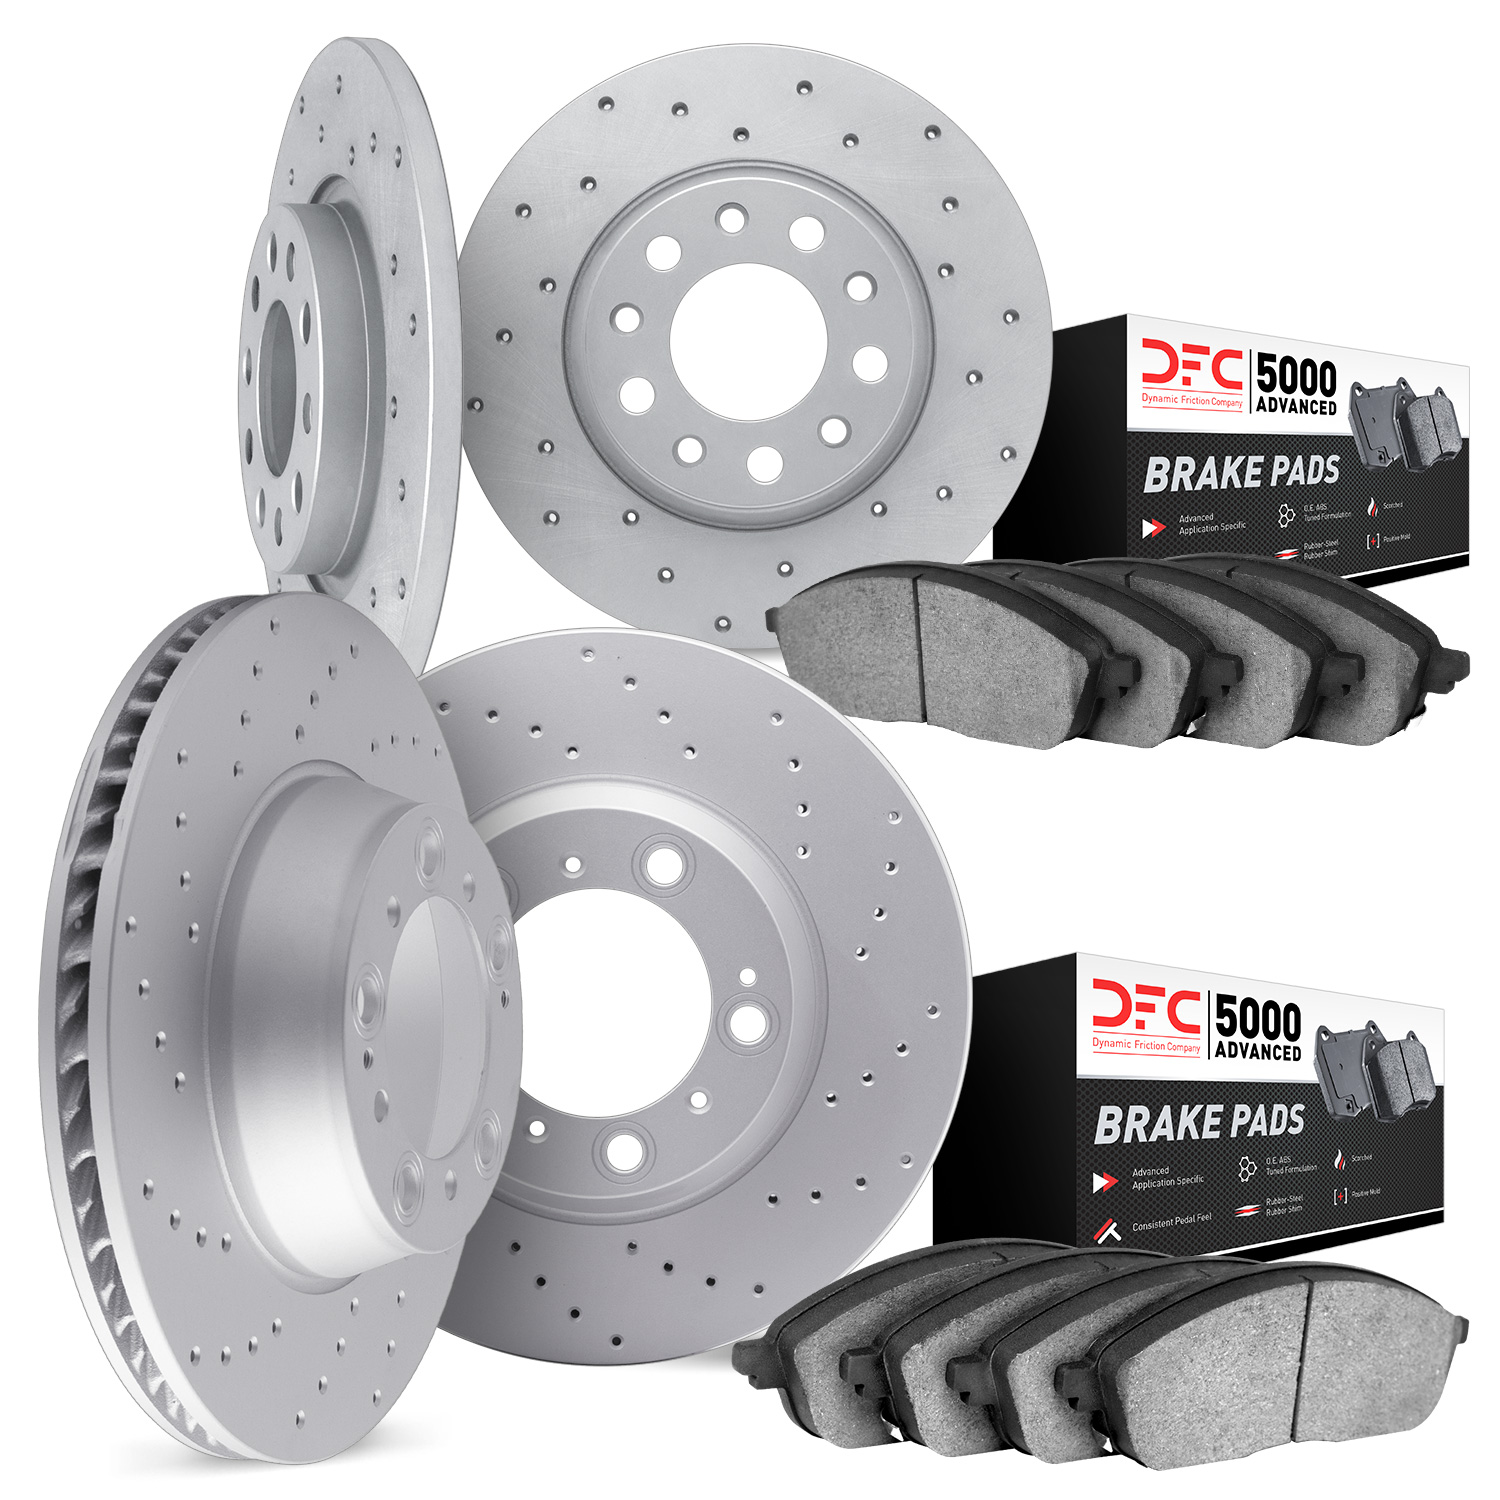 2704-59067 Geoperformance Drilled Brake Rotors with Active Performance Pads Kit, Fits Select Acura/Honda, Position: Front and Re